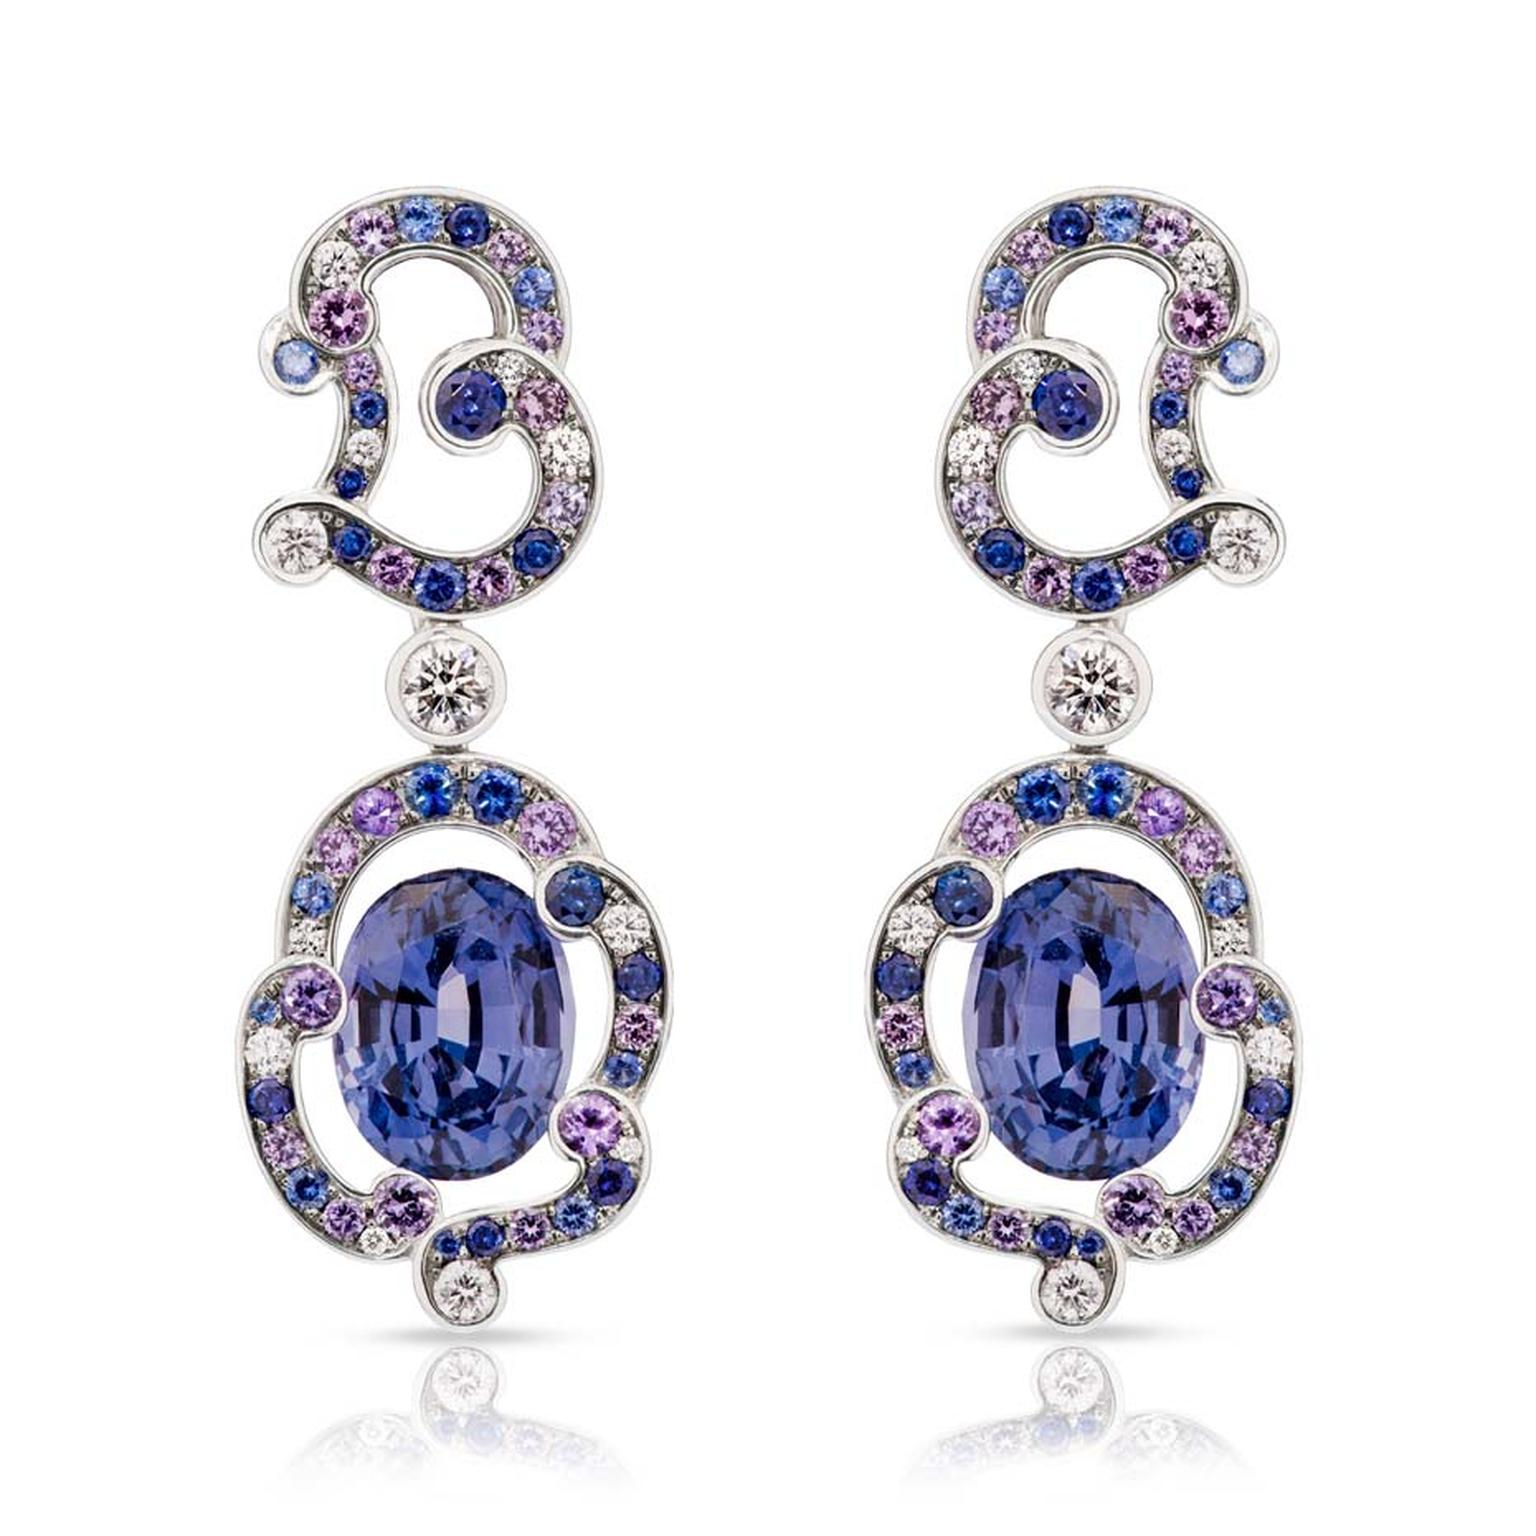 Fabergé Rococo lavender spinel earrings.